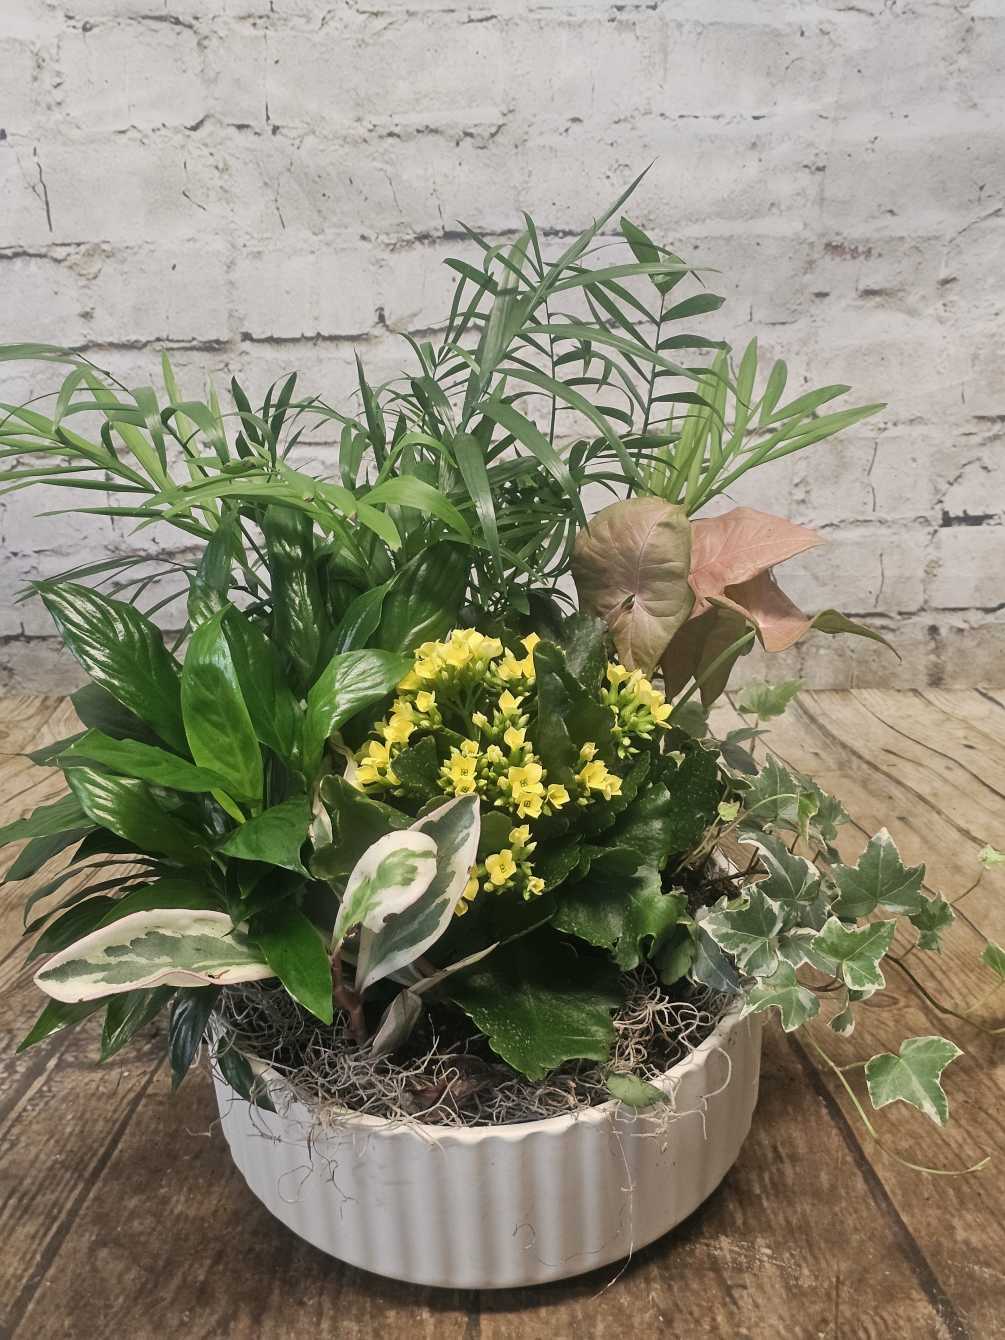 Easy care assortment of tropical plants in a ceramic planter. 
(Content may